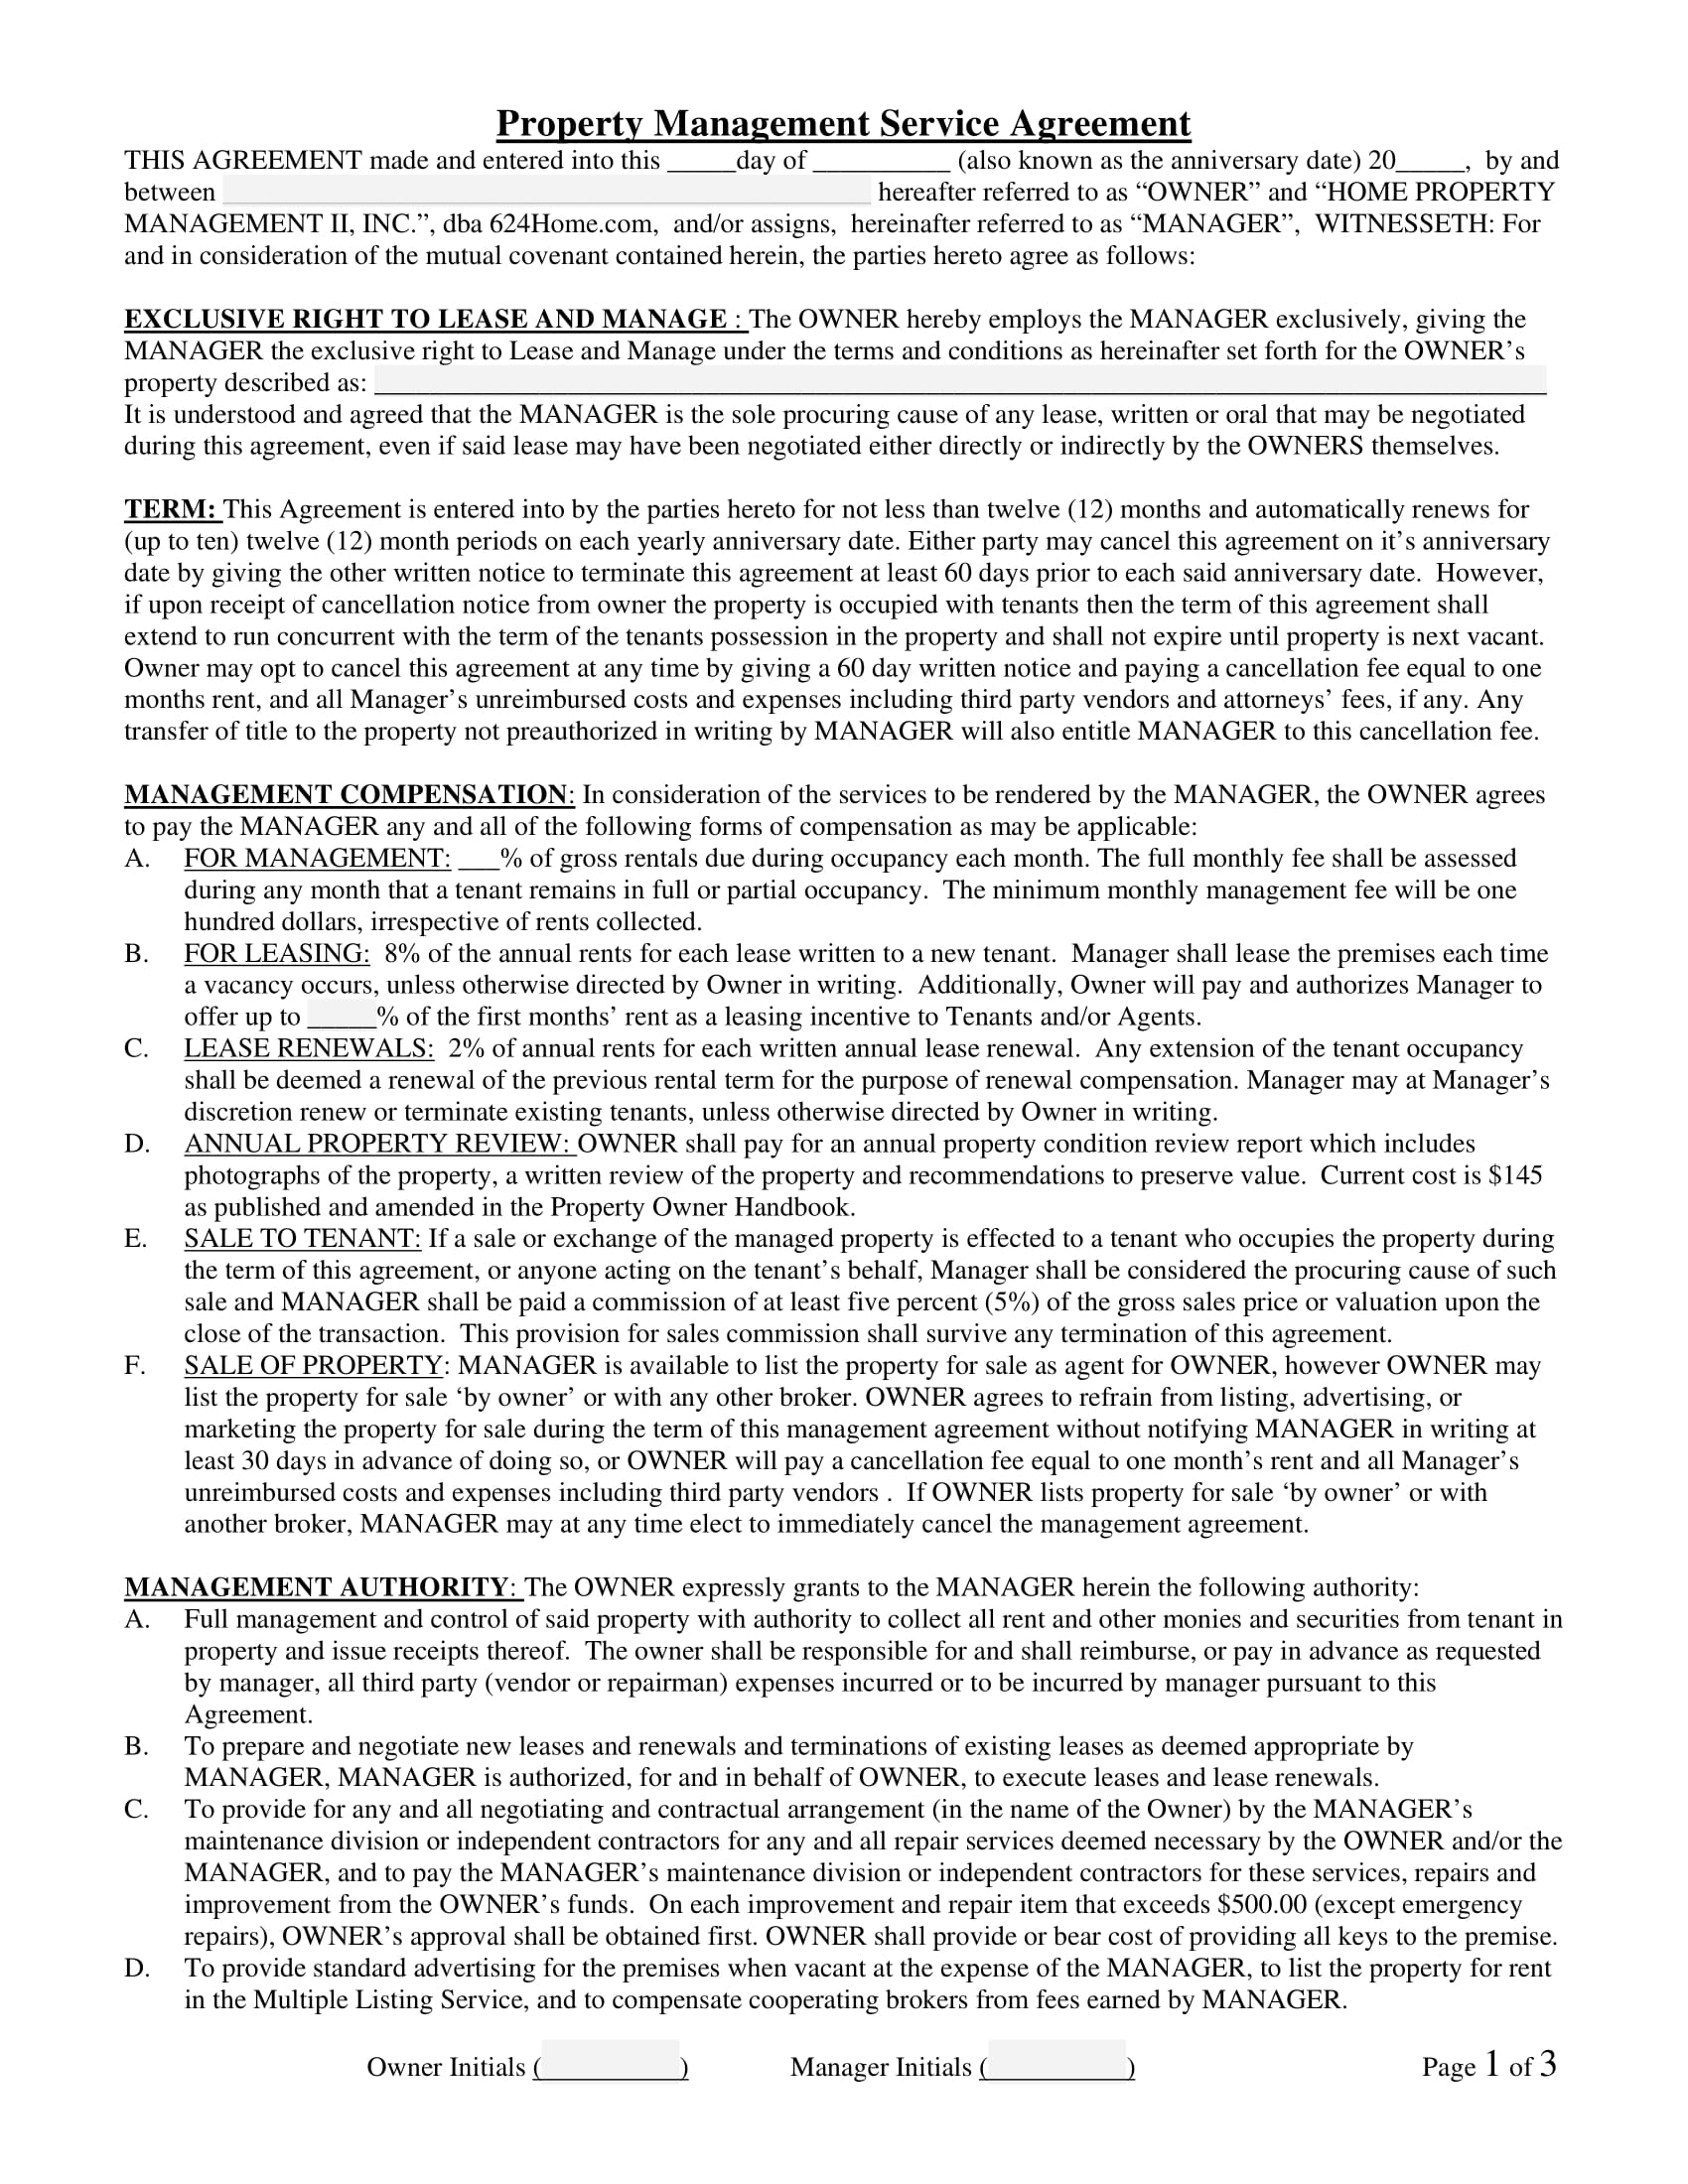 property management service agreement example